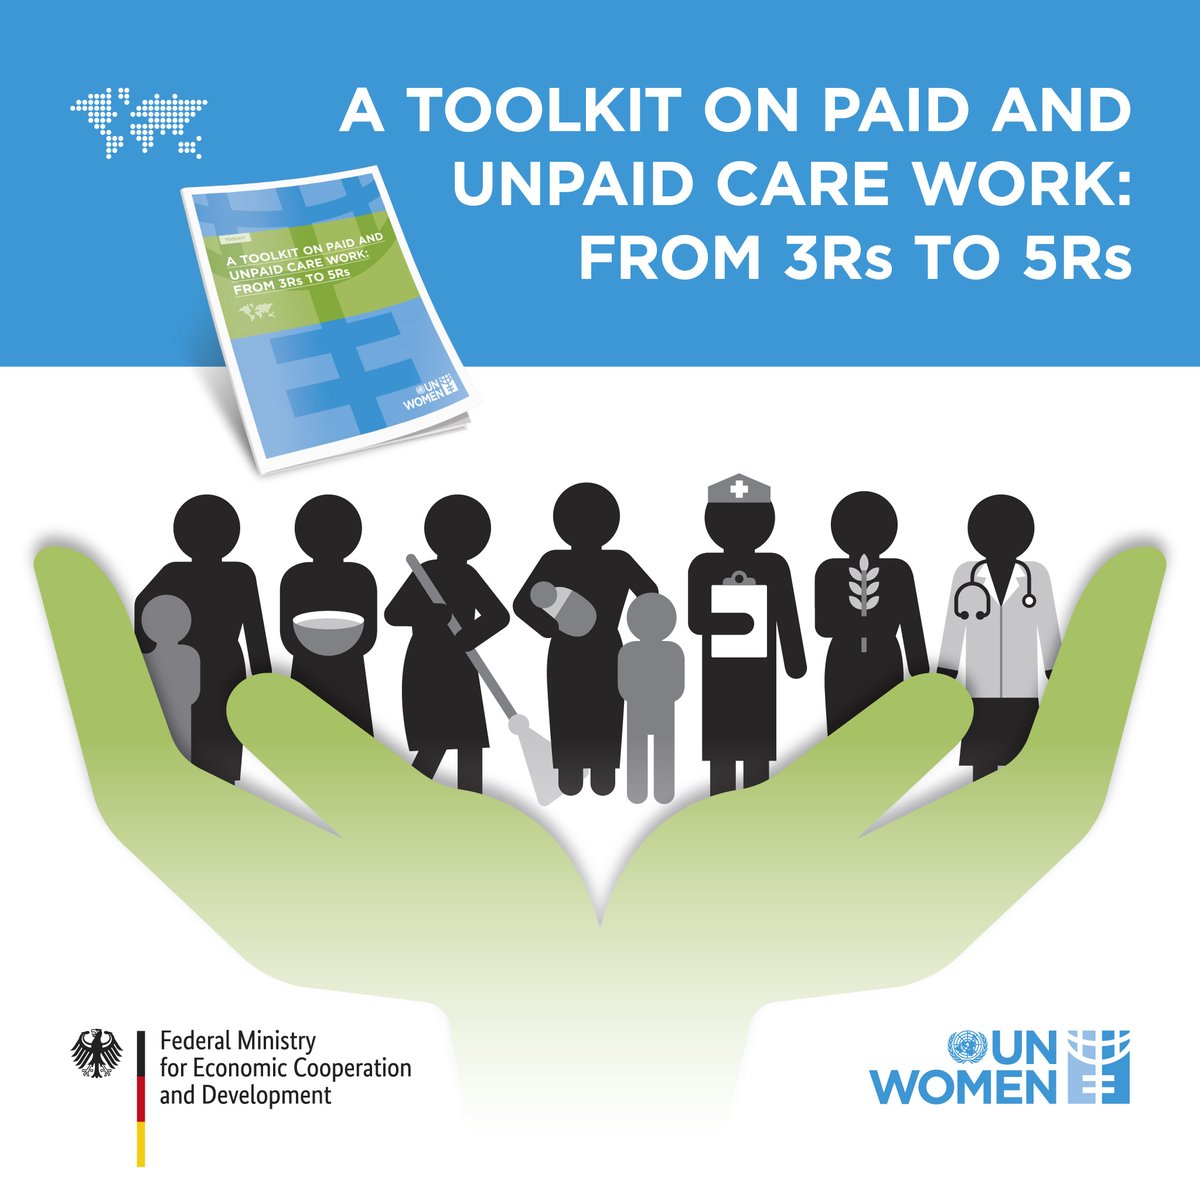 Women & girls spend 3 times as much time as men & boys on unpaid care work. The new Care Toolkit, produced by @UN_Women and Germany during its G7 presidency, compiles resources to help guide different actors working on care. ow.ly/yLQF50L94ua